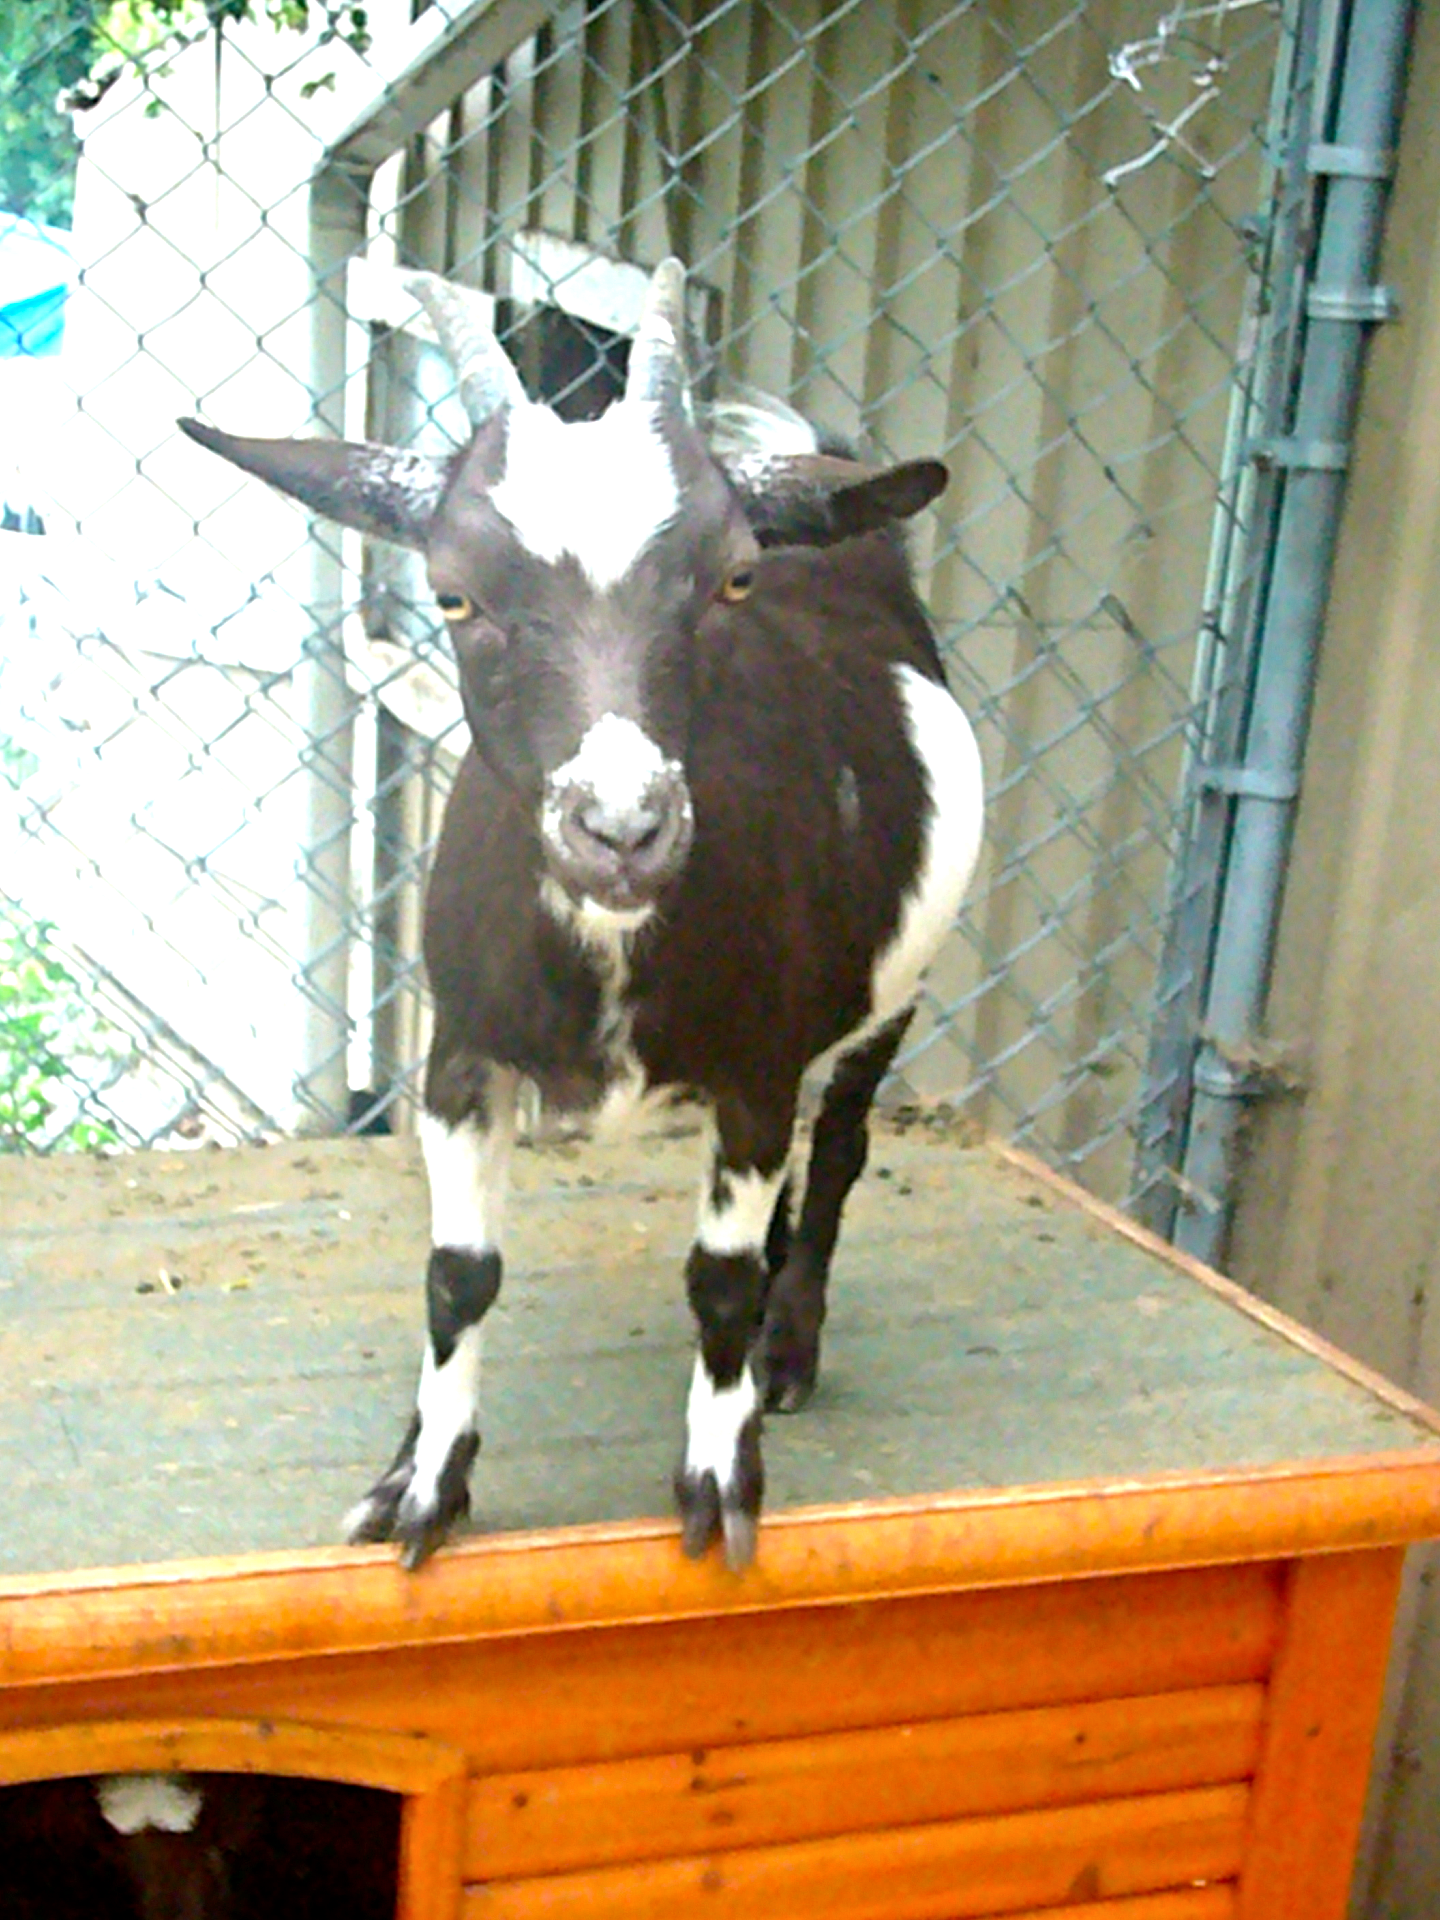 A goat standing on a box.